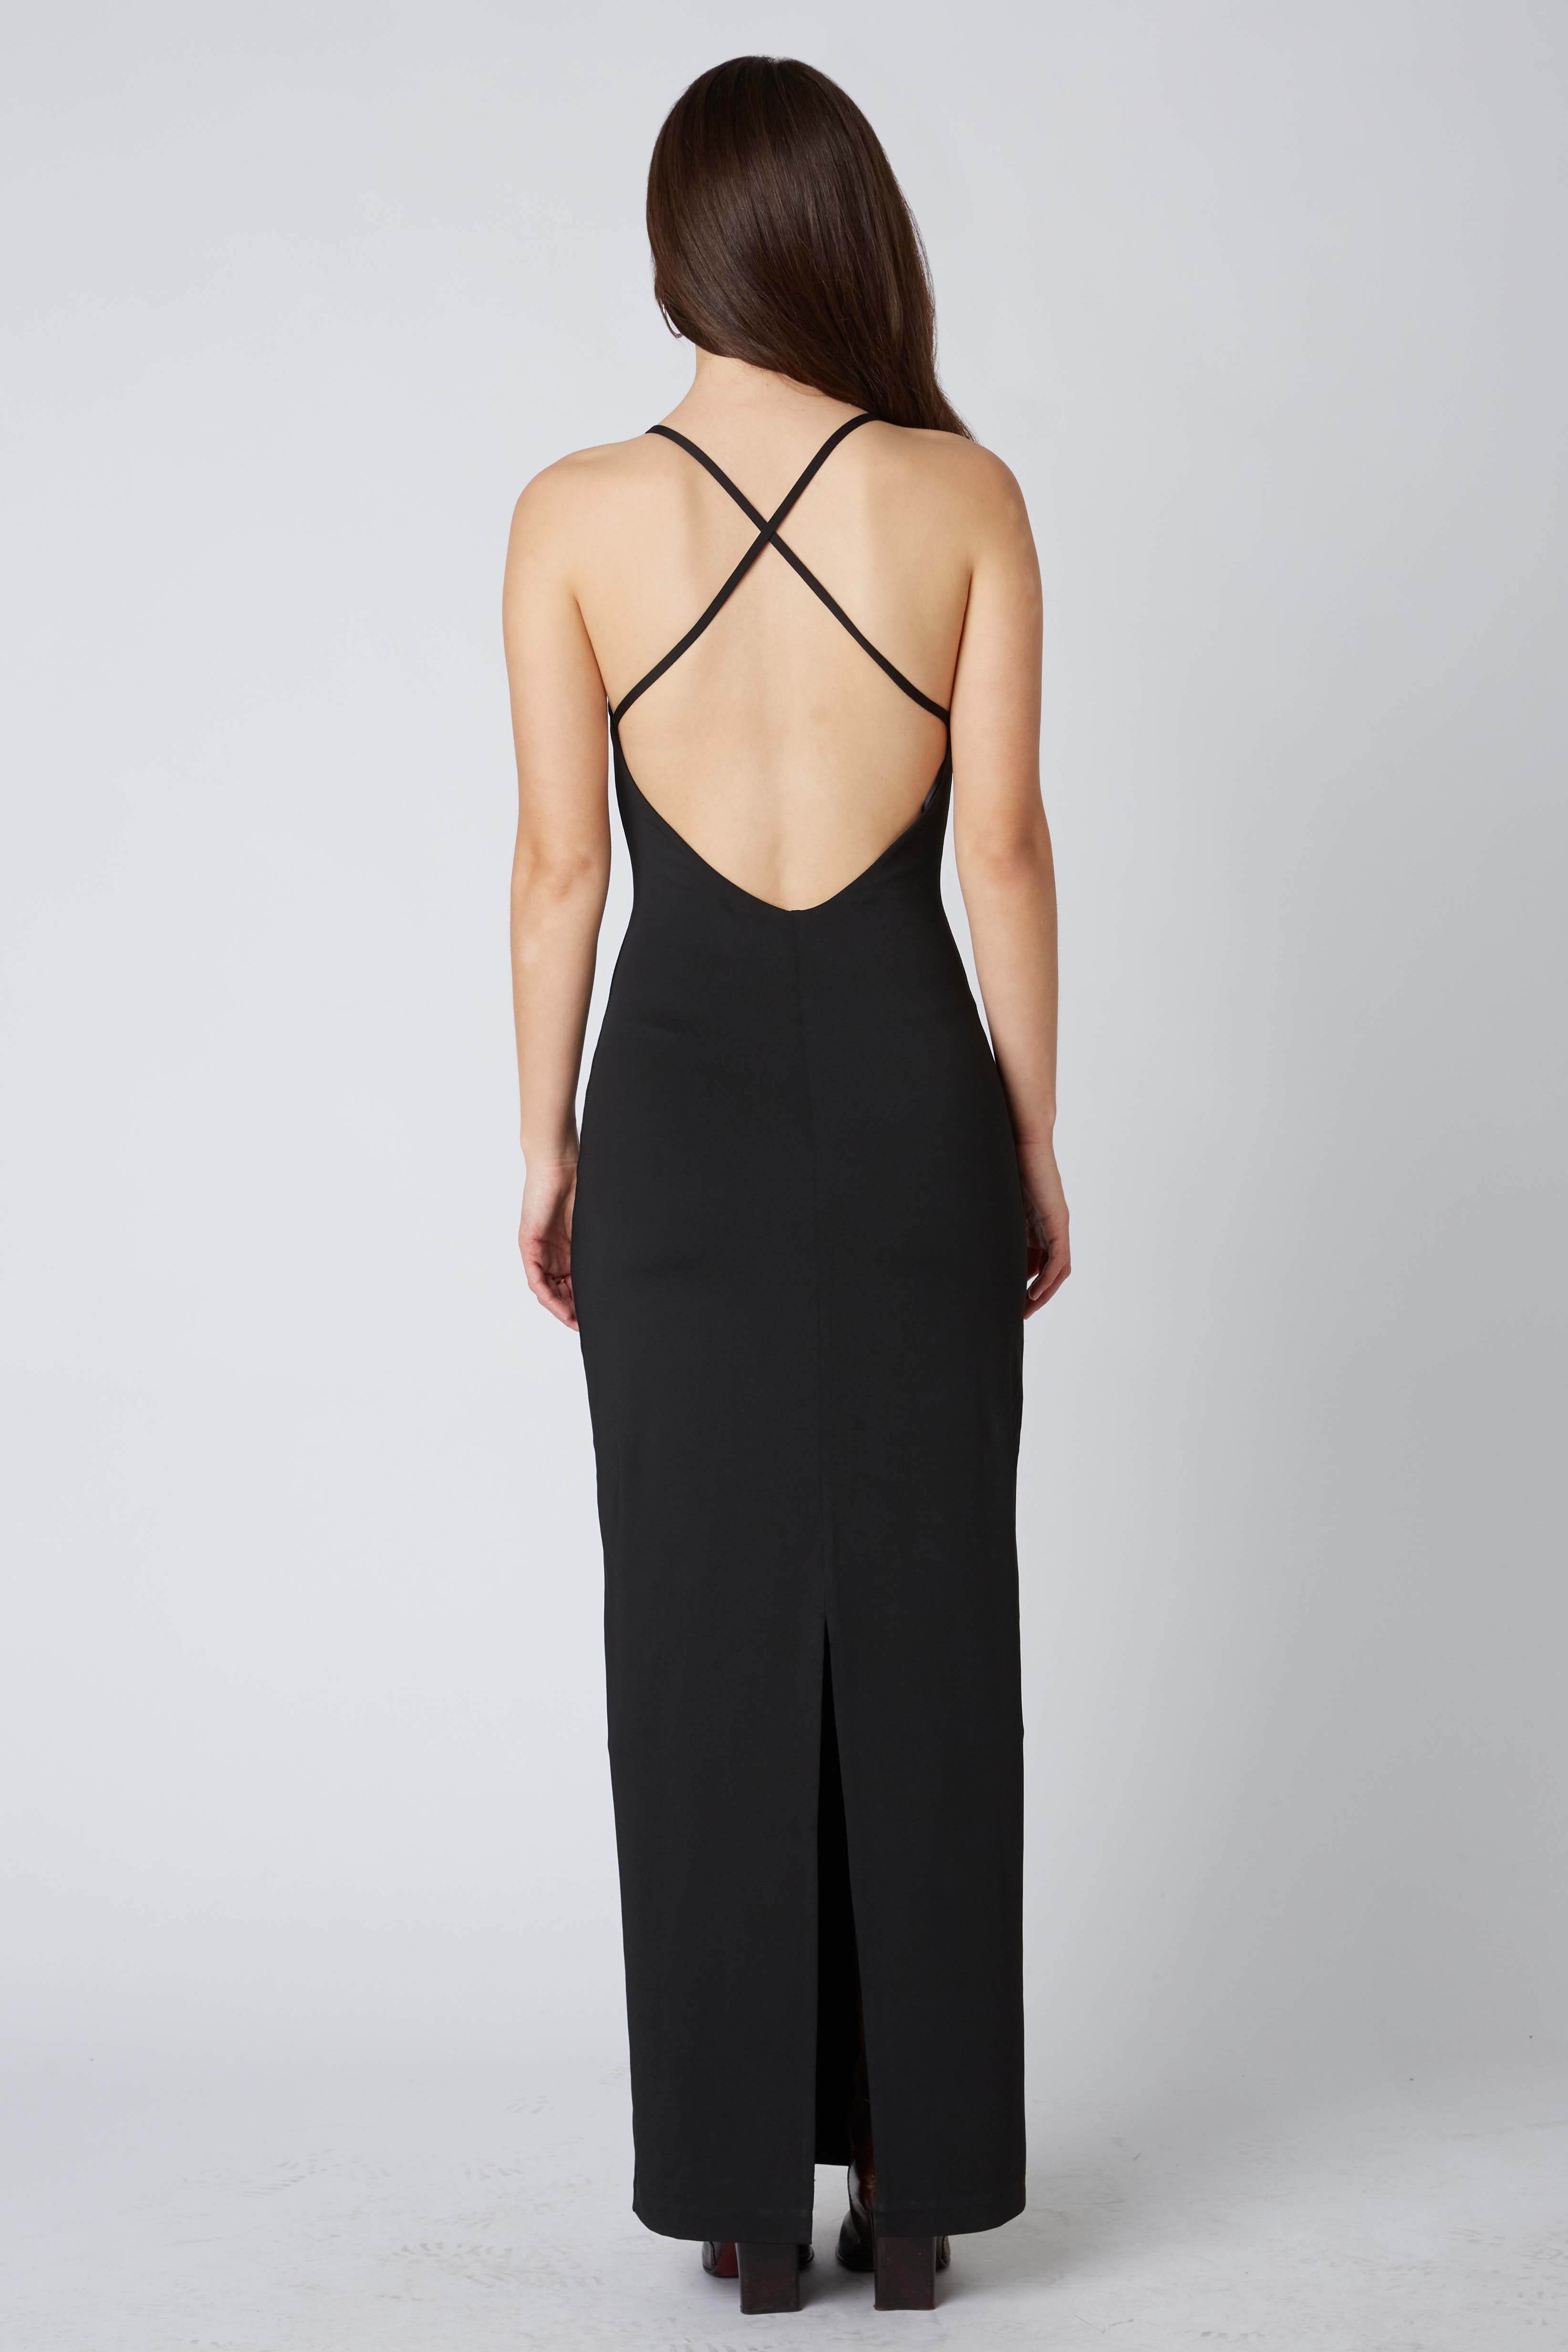 Knit Bodycon Maxi Dress in Black Back View